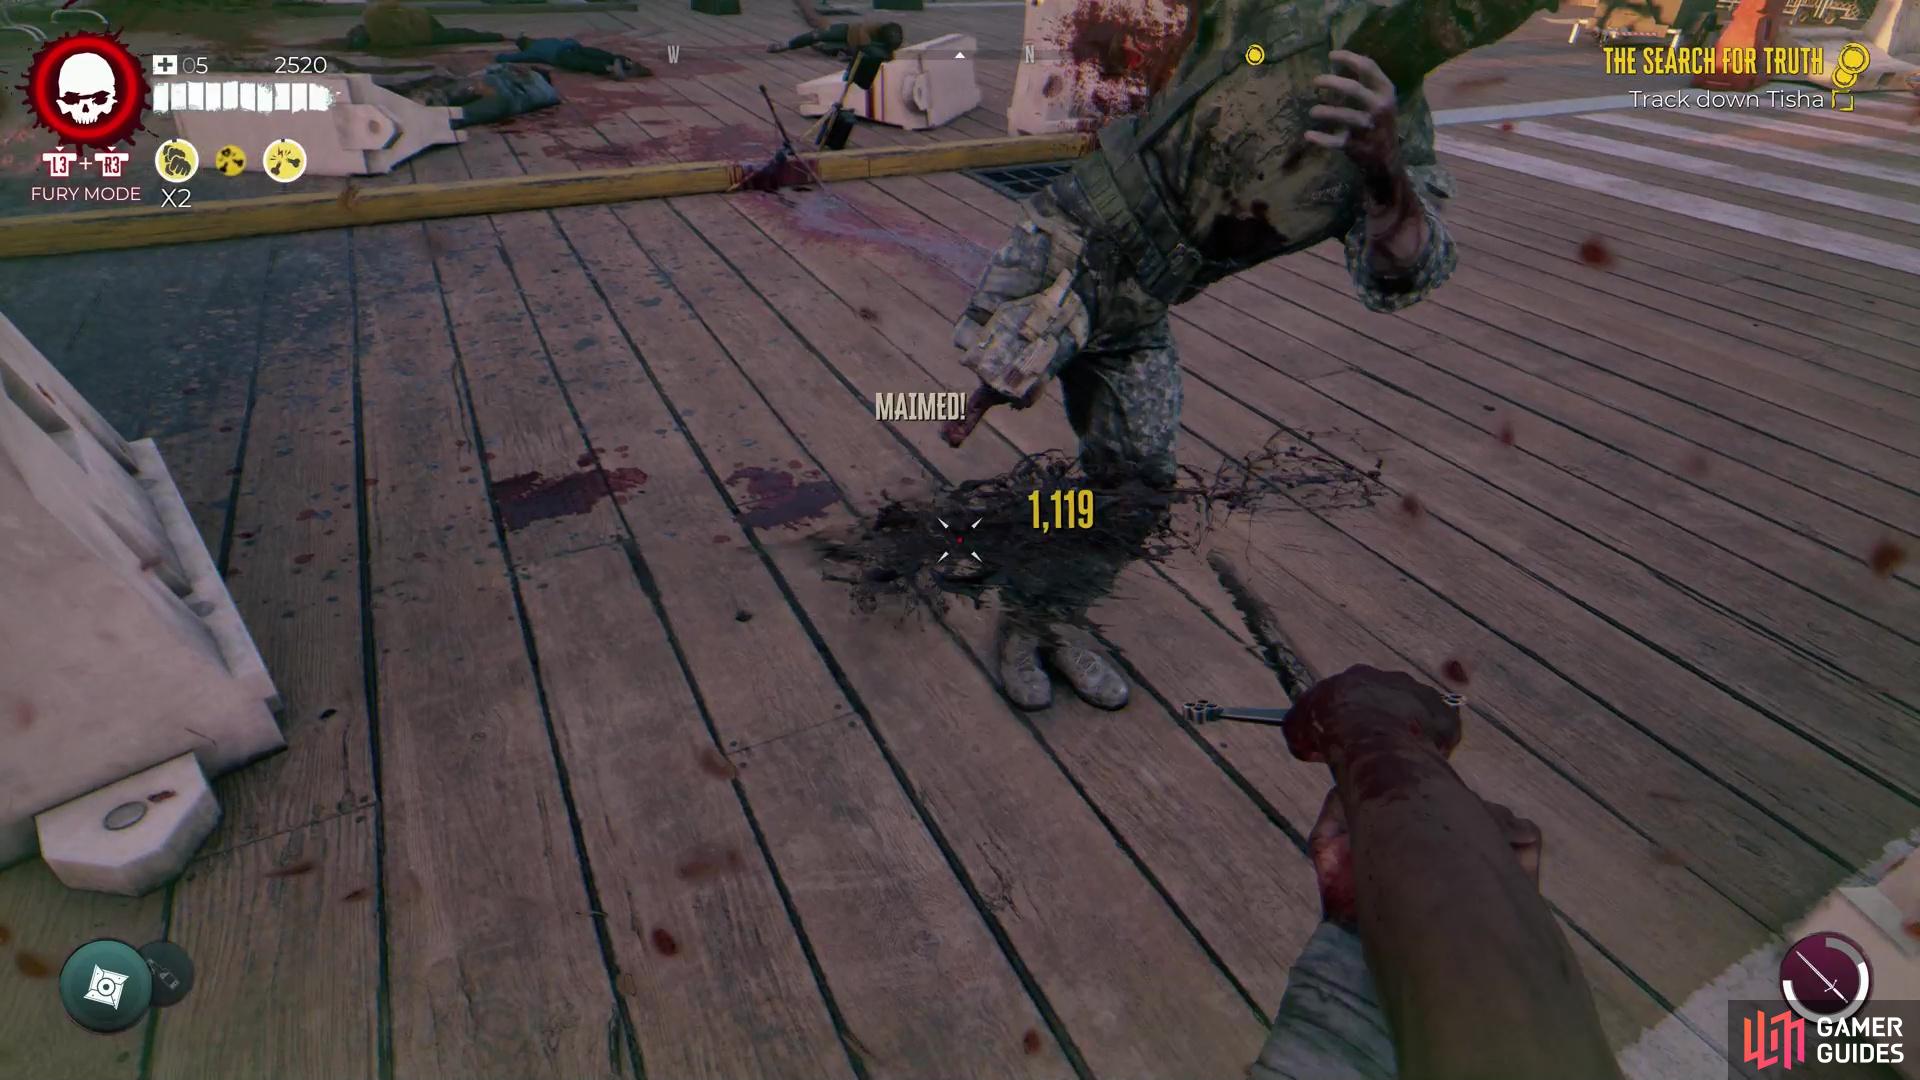 B tier weapons generally demand a rangier, more methodical approach to zombie limb trimming.